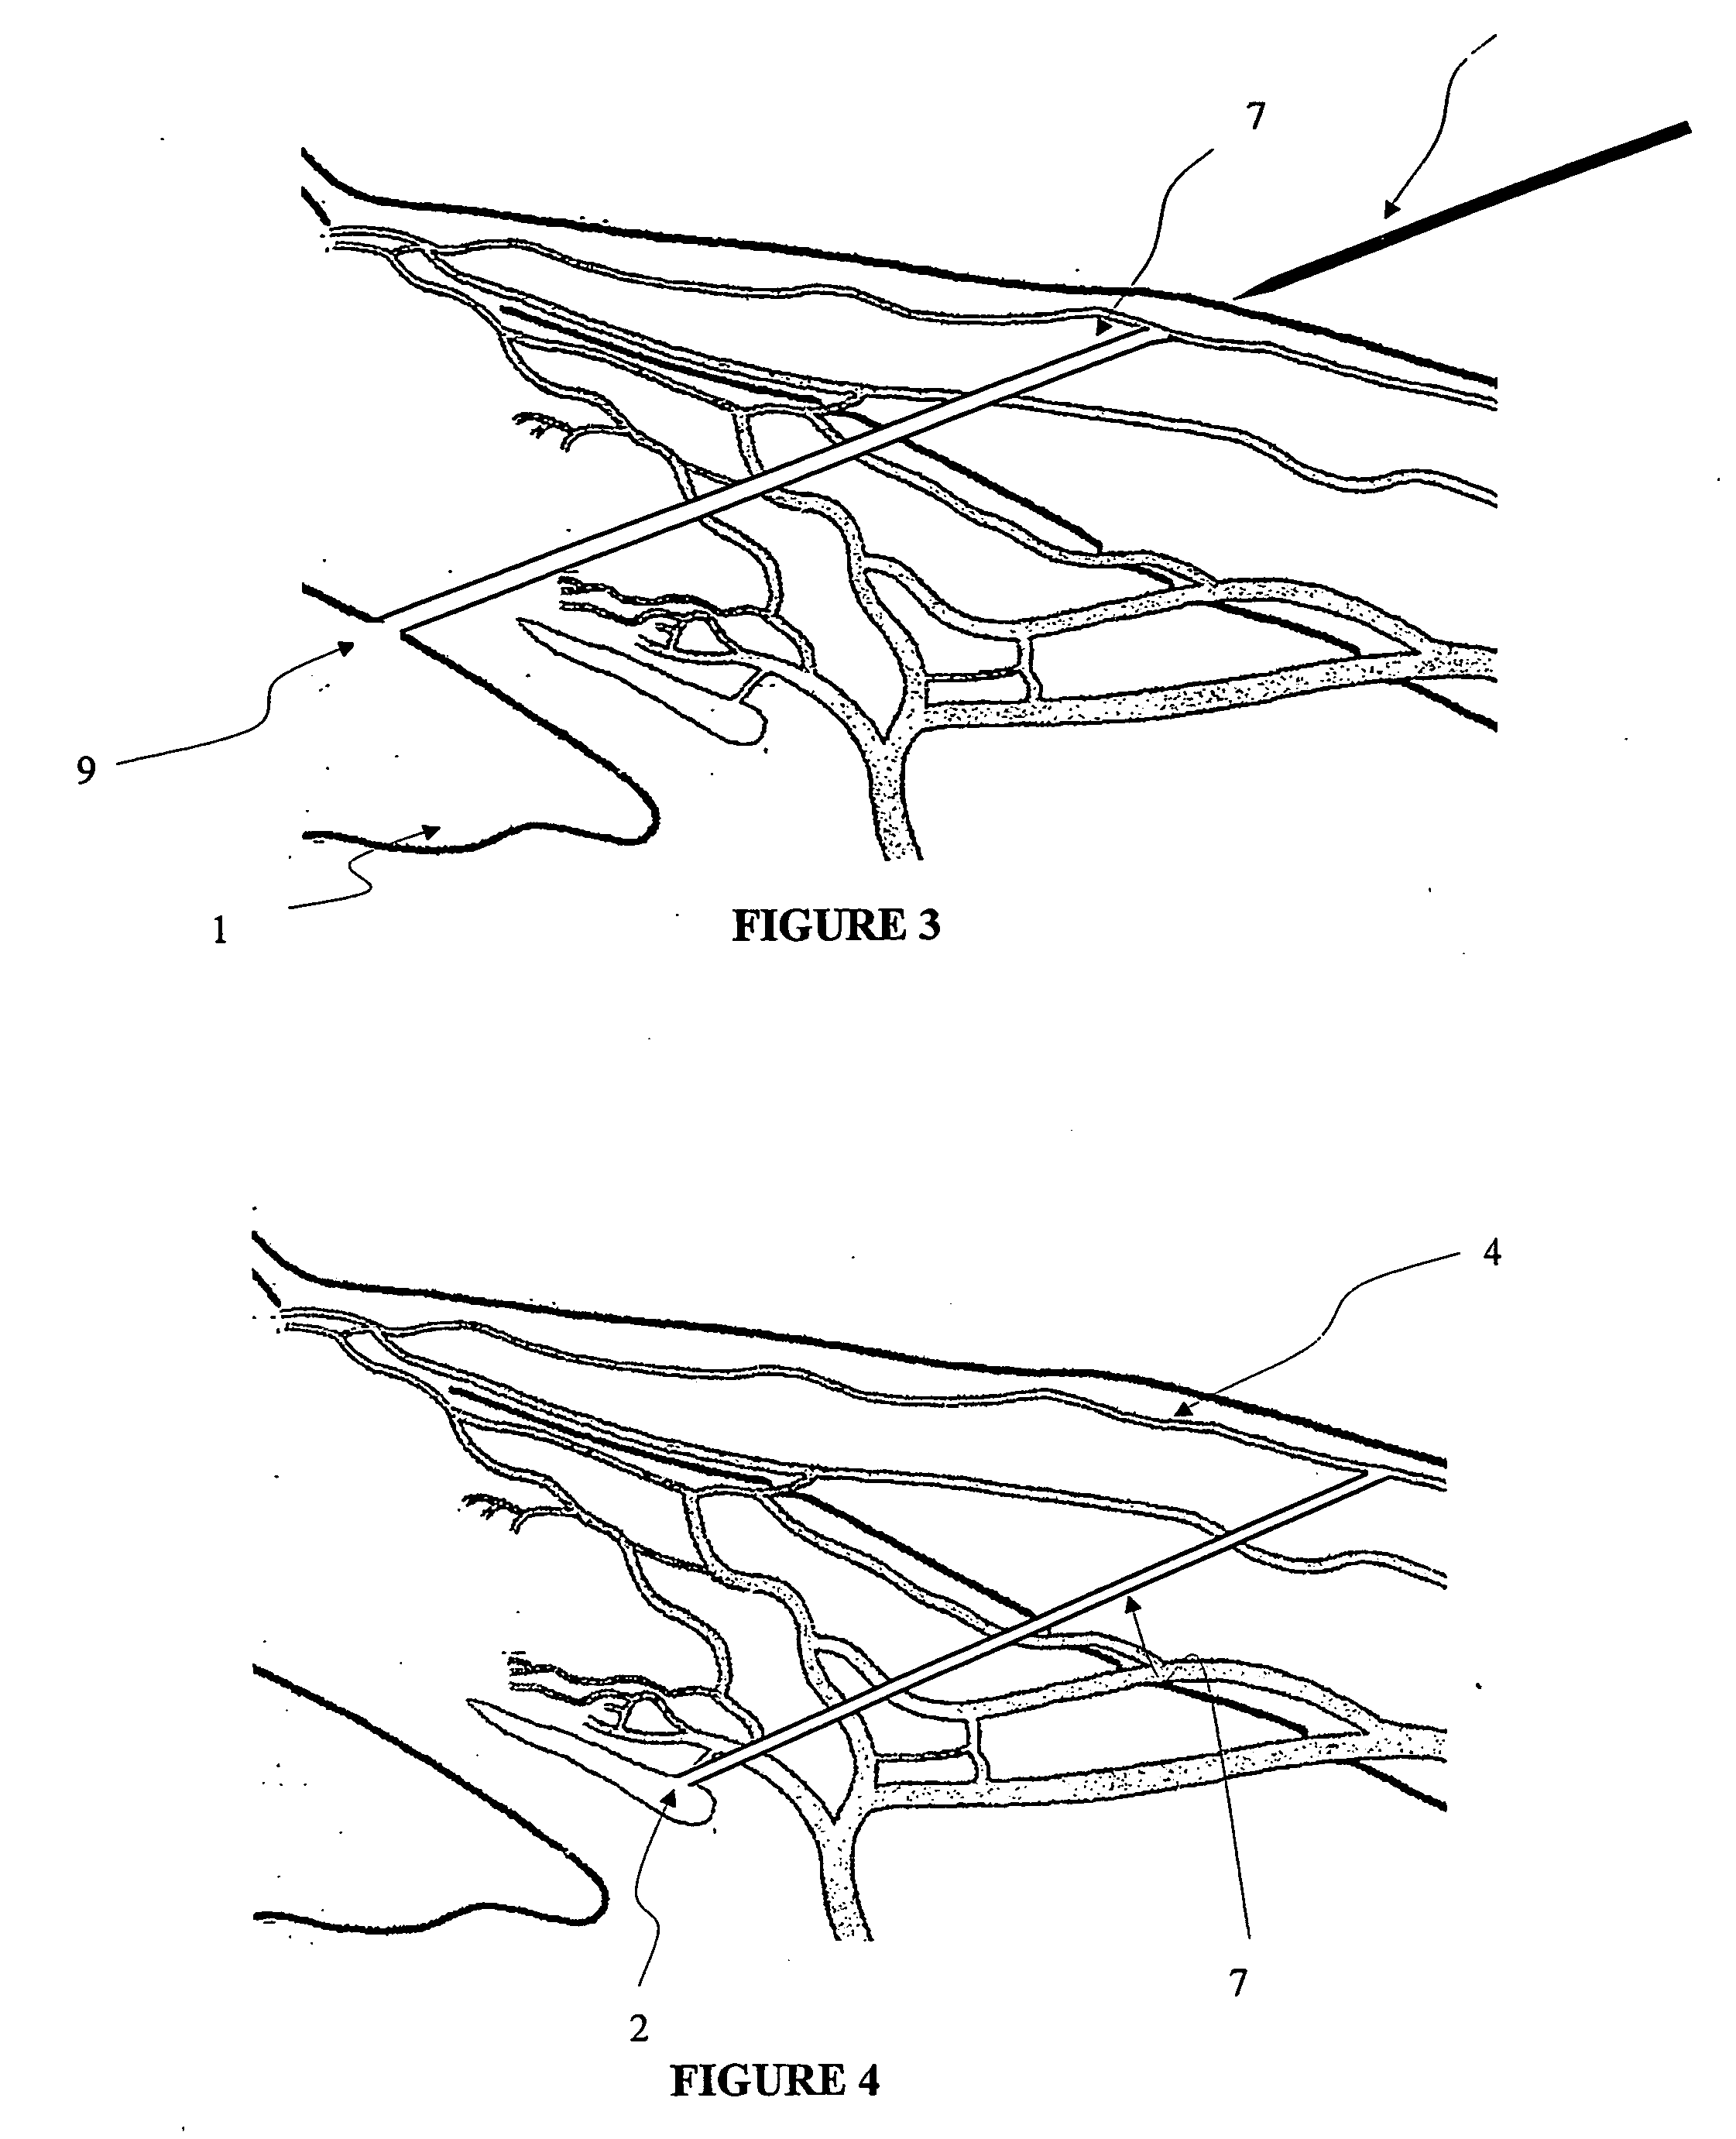 Apparatus and method for surgical bypass of aqueous humor